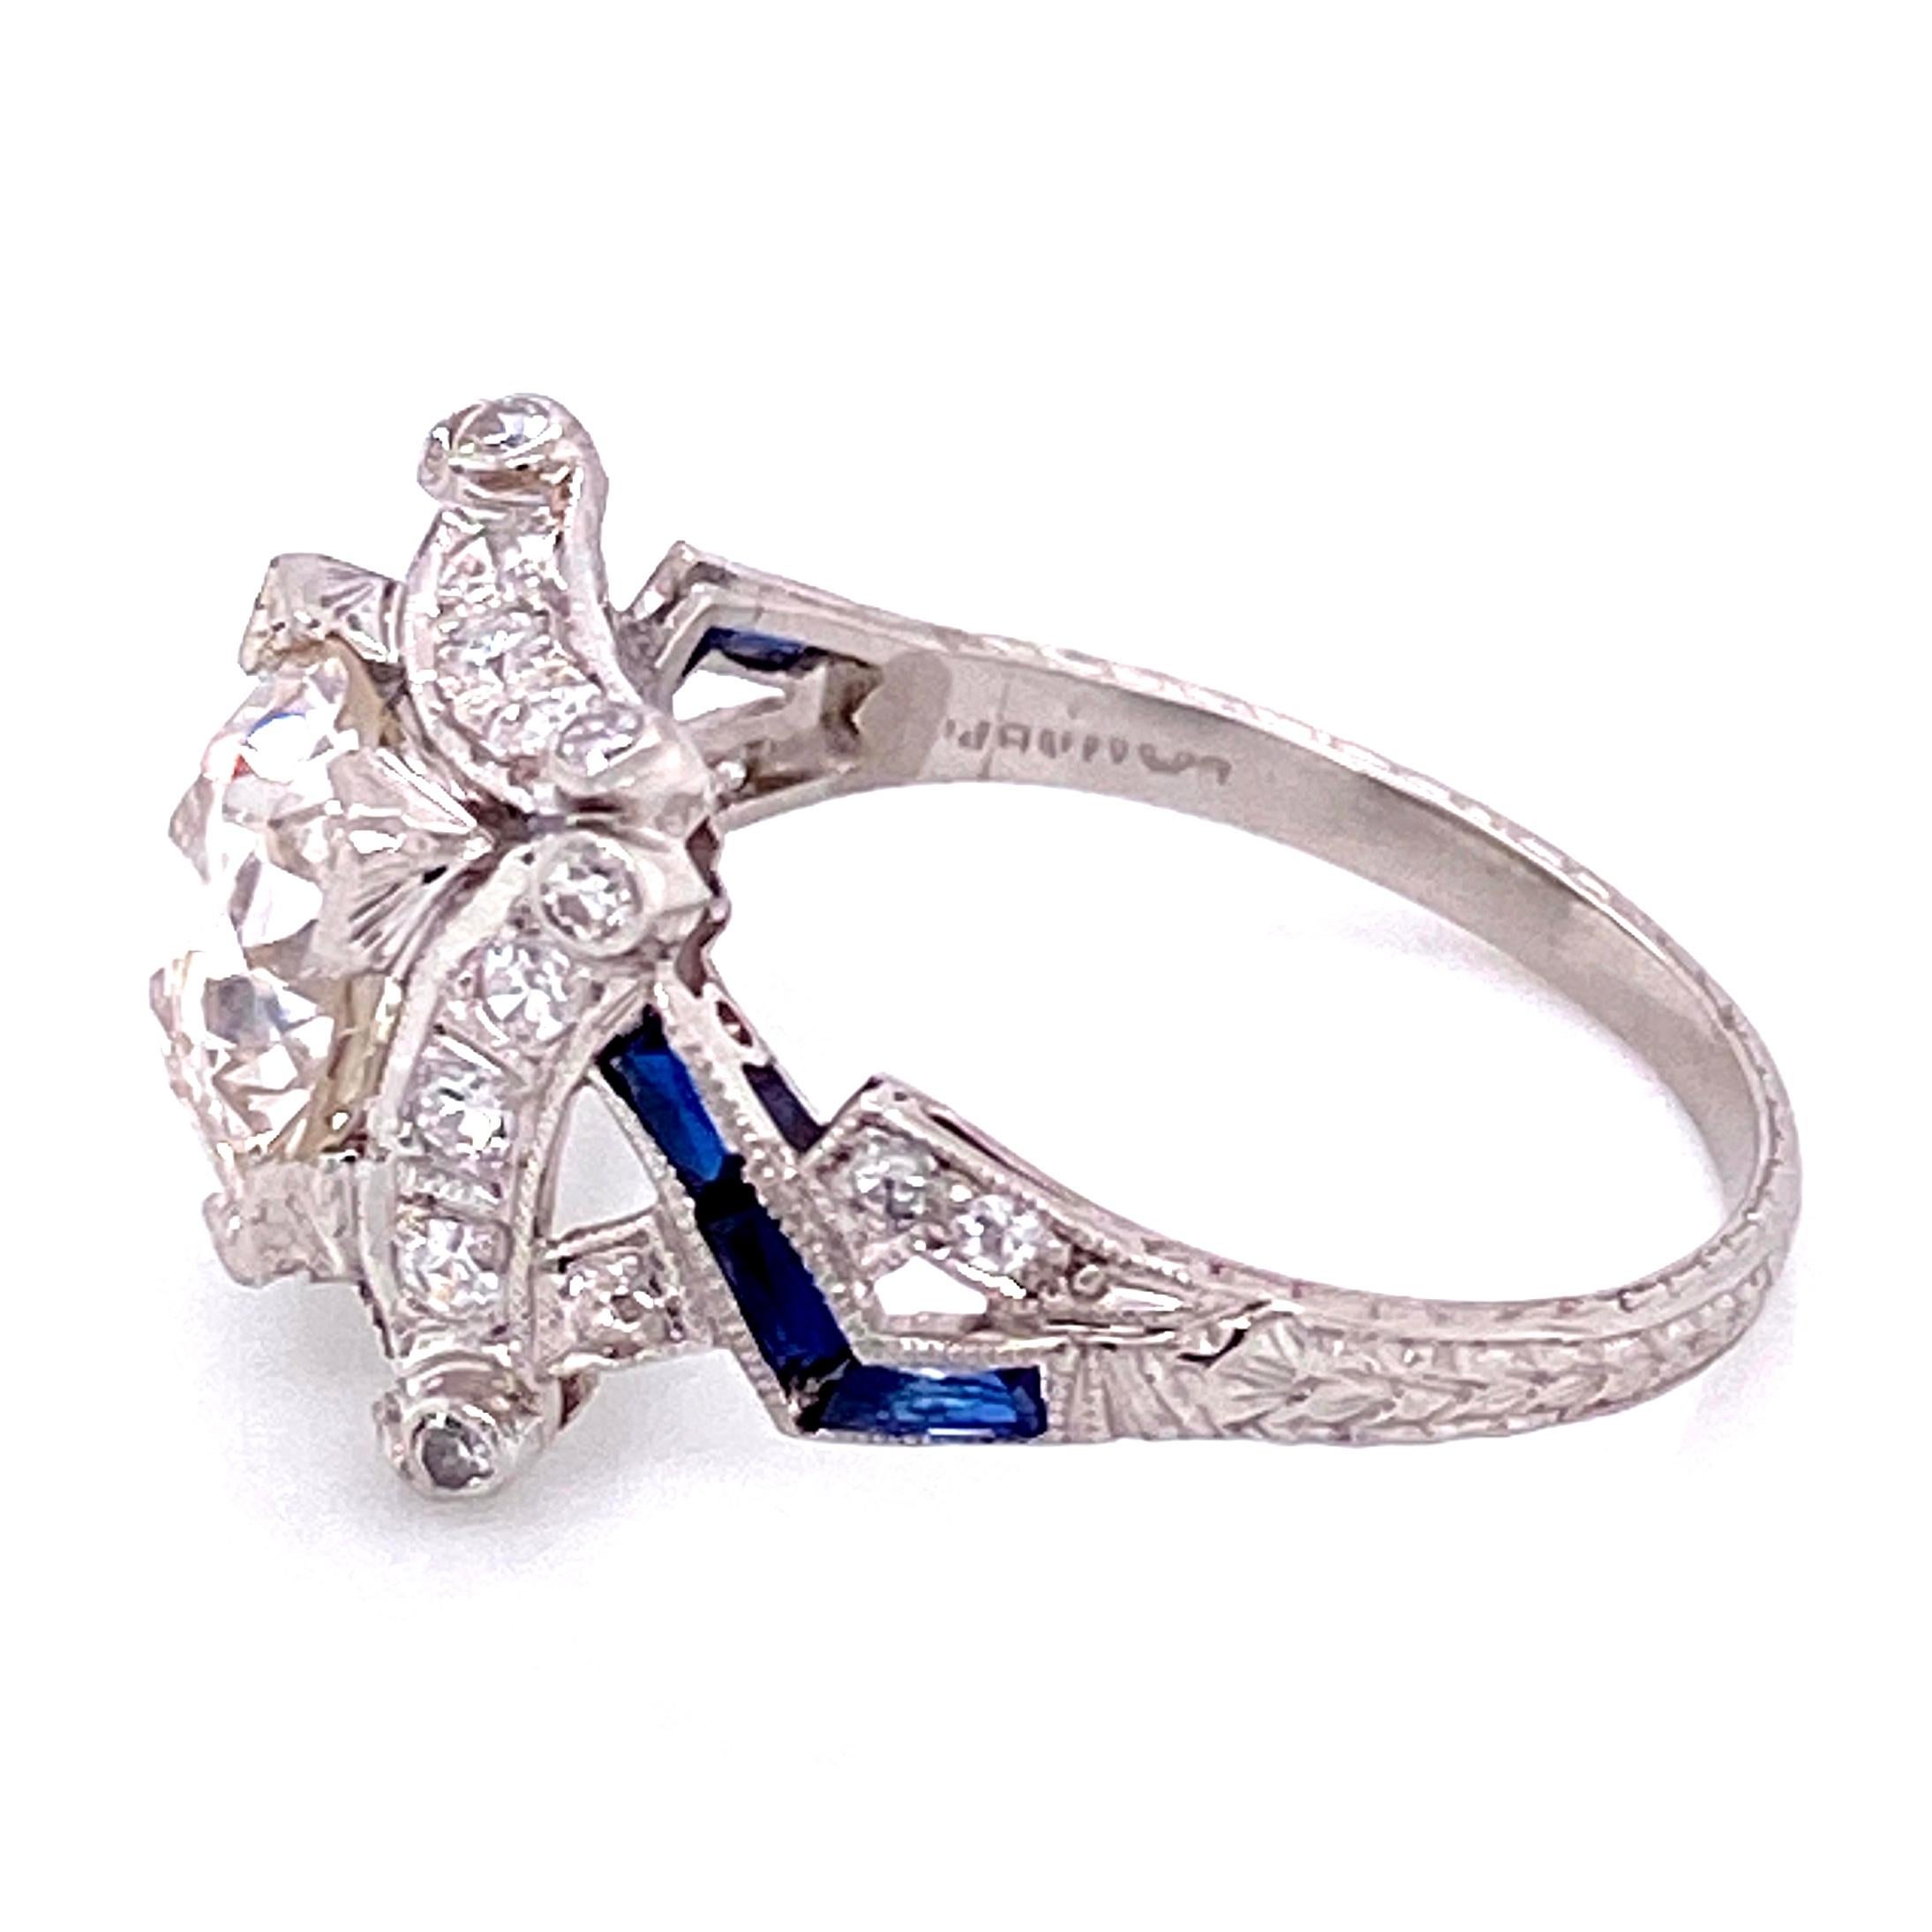 Old European Cut 2.16 Carat Diamond and Sapphire Platinum Cocktail Ring Fine Estate Jewelry For Sale